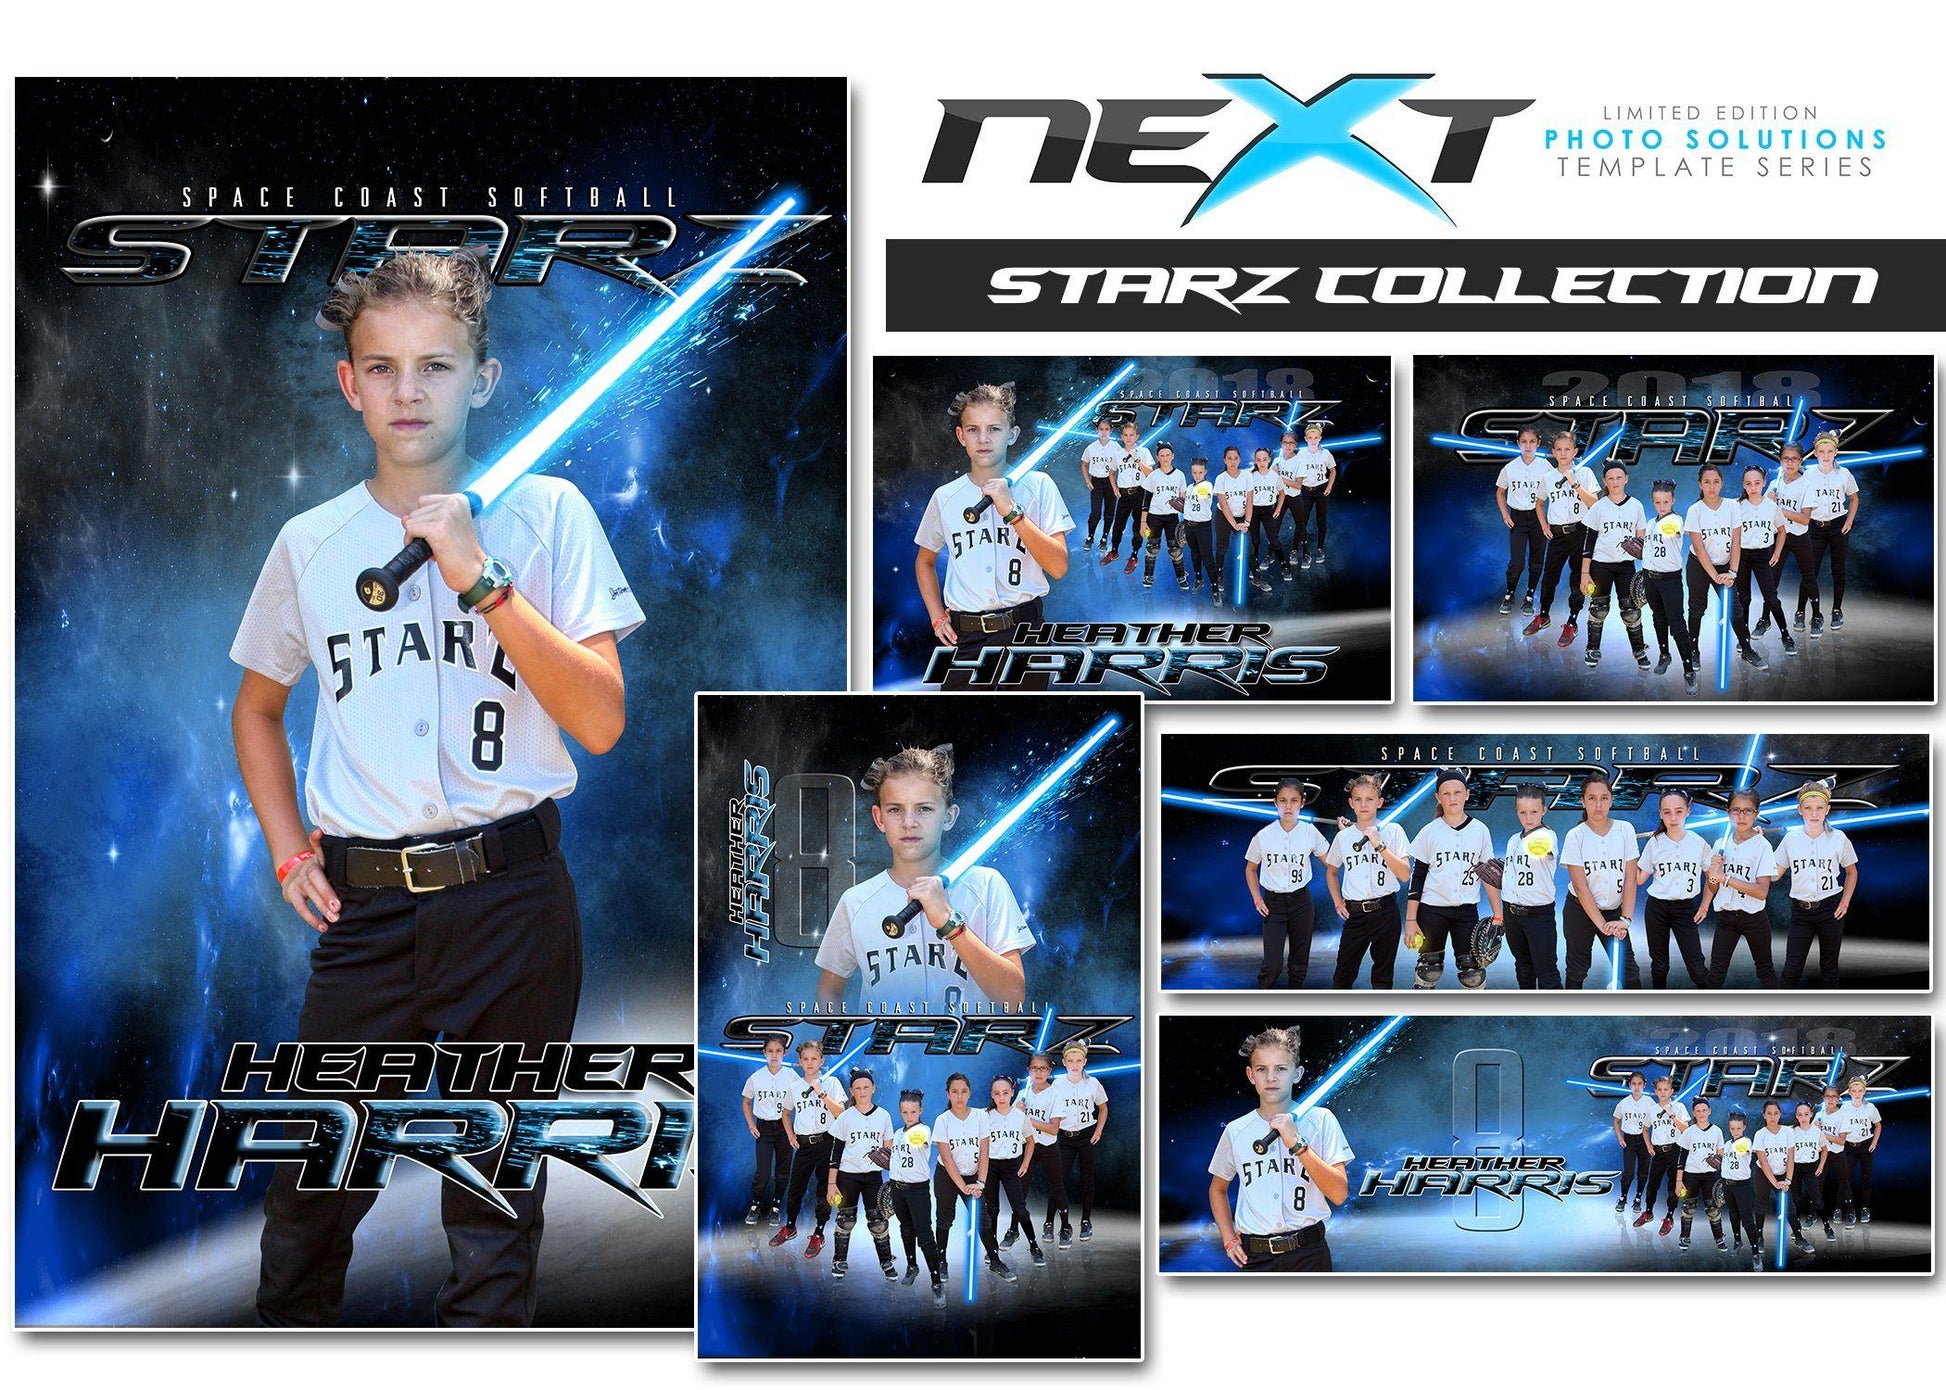 01 Full Set - STARZ Collection-Photoshop Template - Photo Solutions